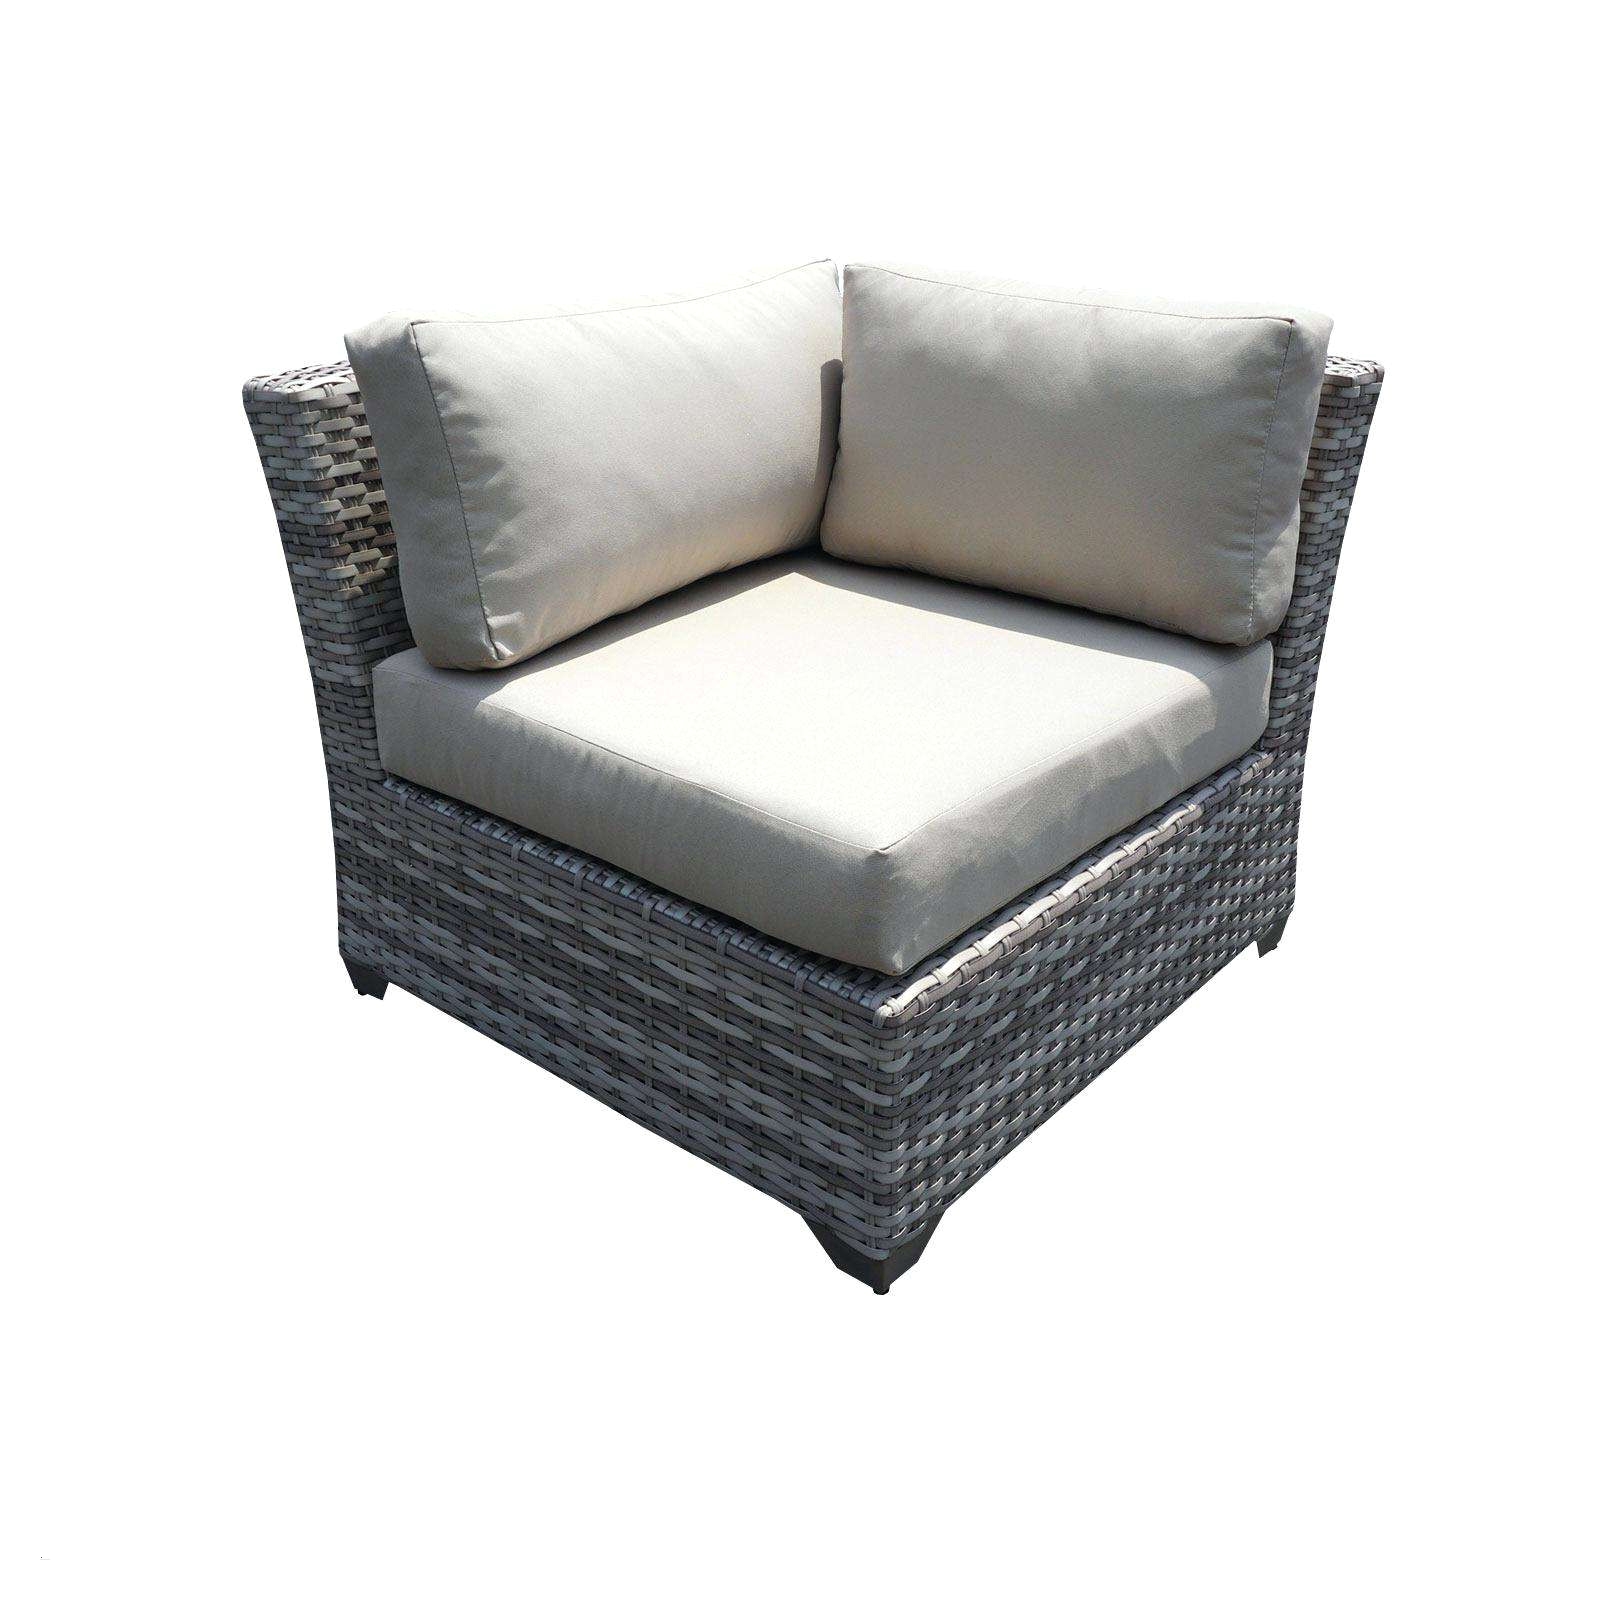 bamboo outdoor furniture unique bamboo outdoor furniture inspirational wicker outdoor sofa 0d patio